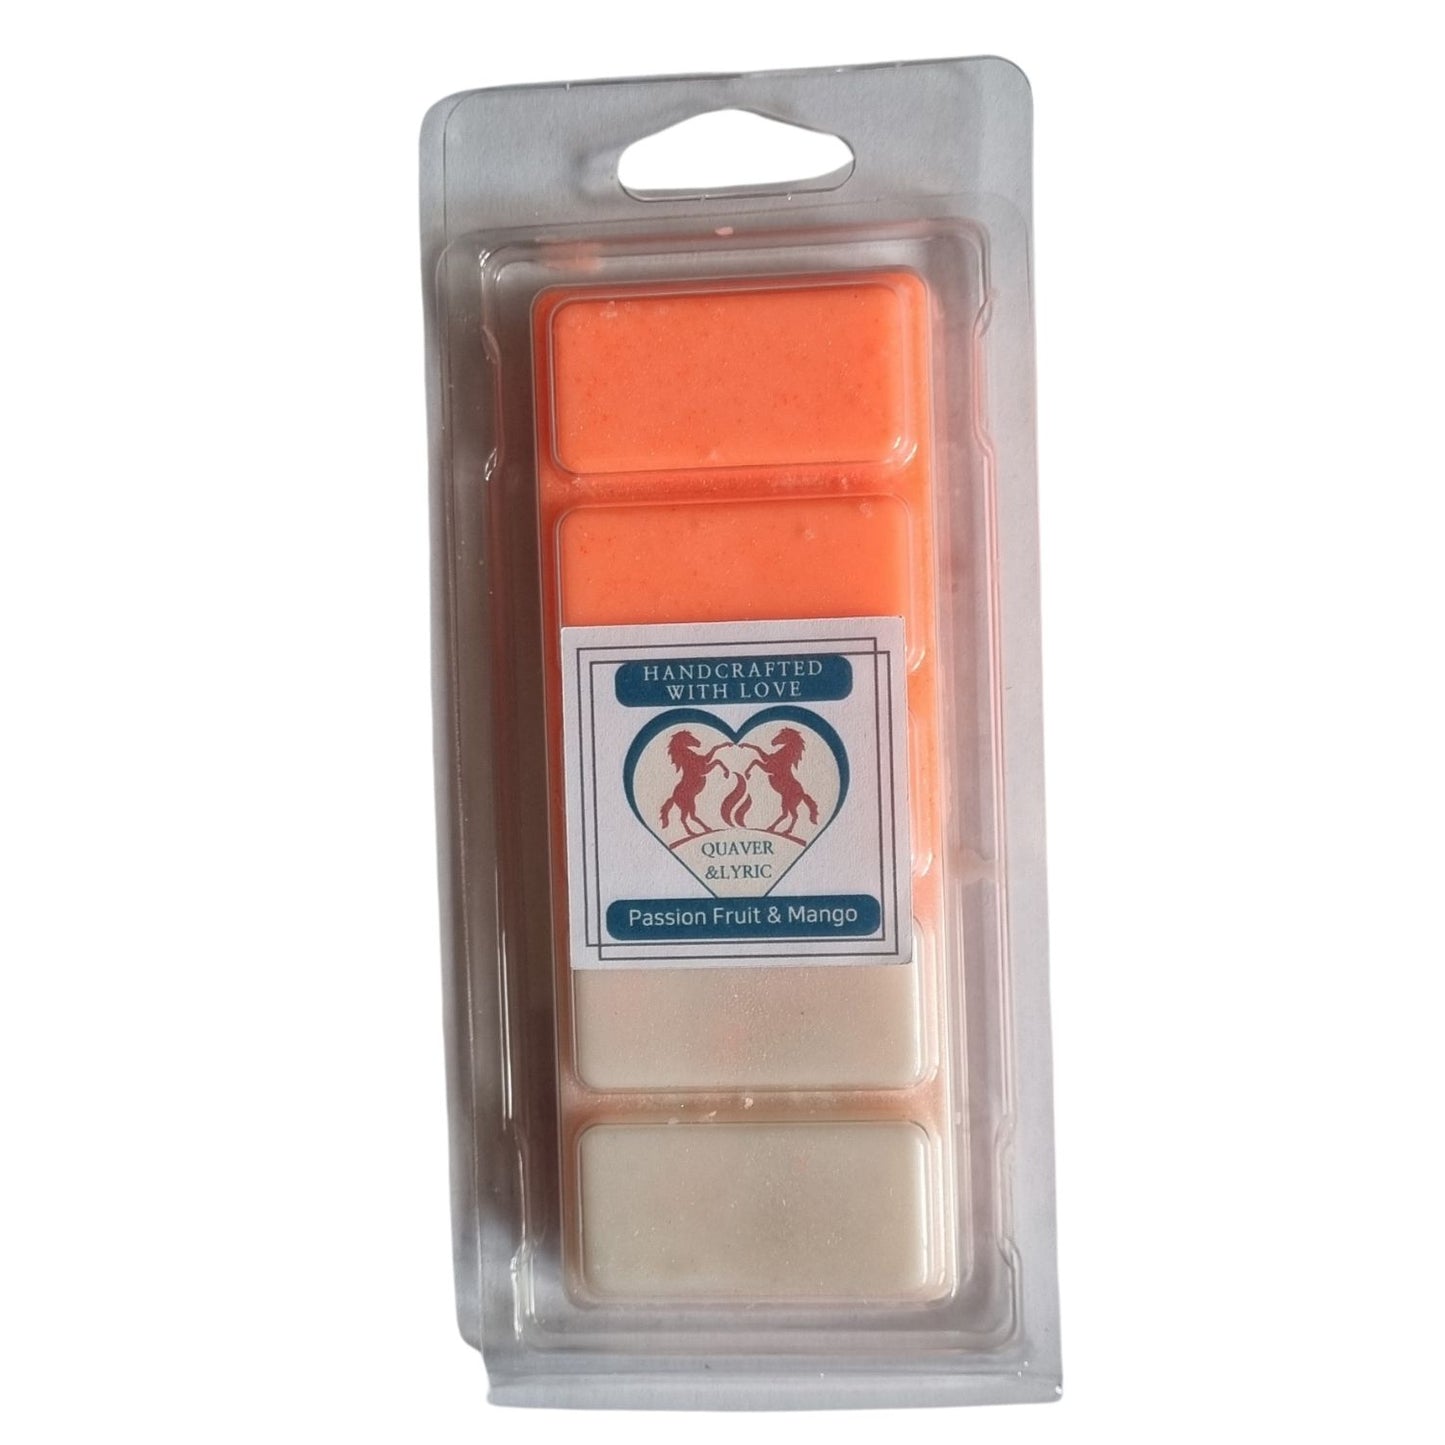  a bright orange and white wax melt bar in a clamshell with quaver and lyric rearing horse branding